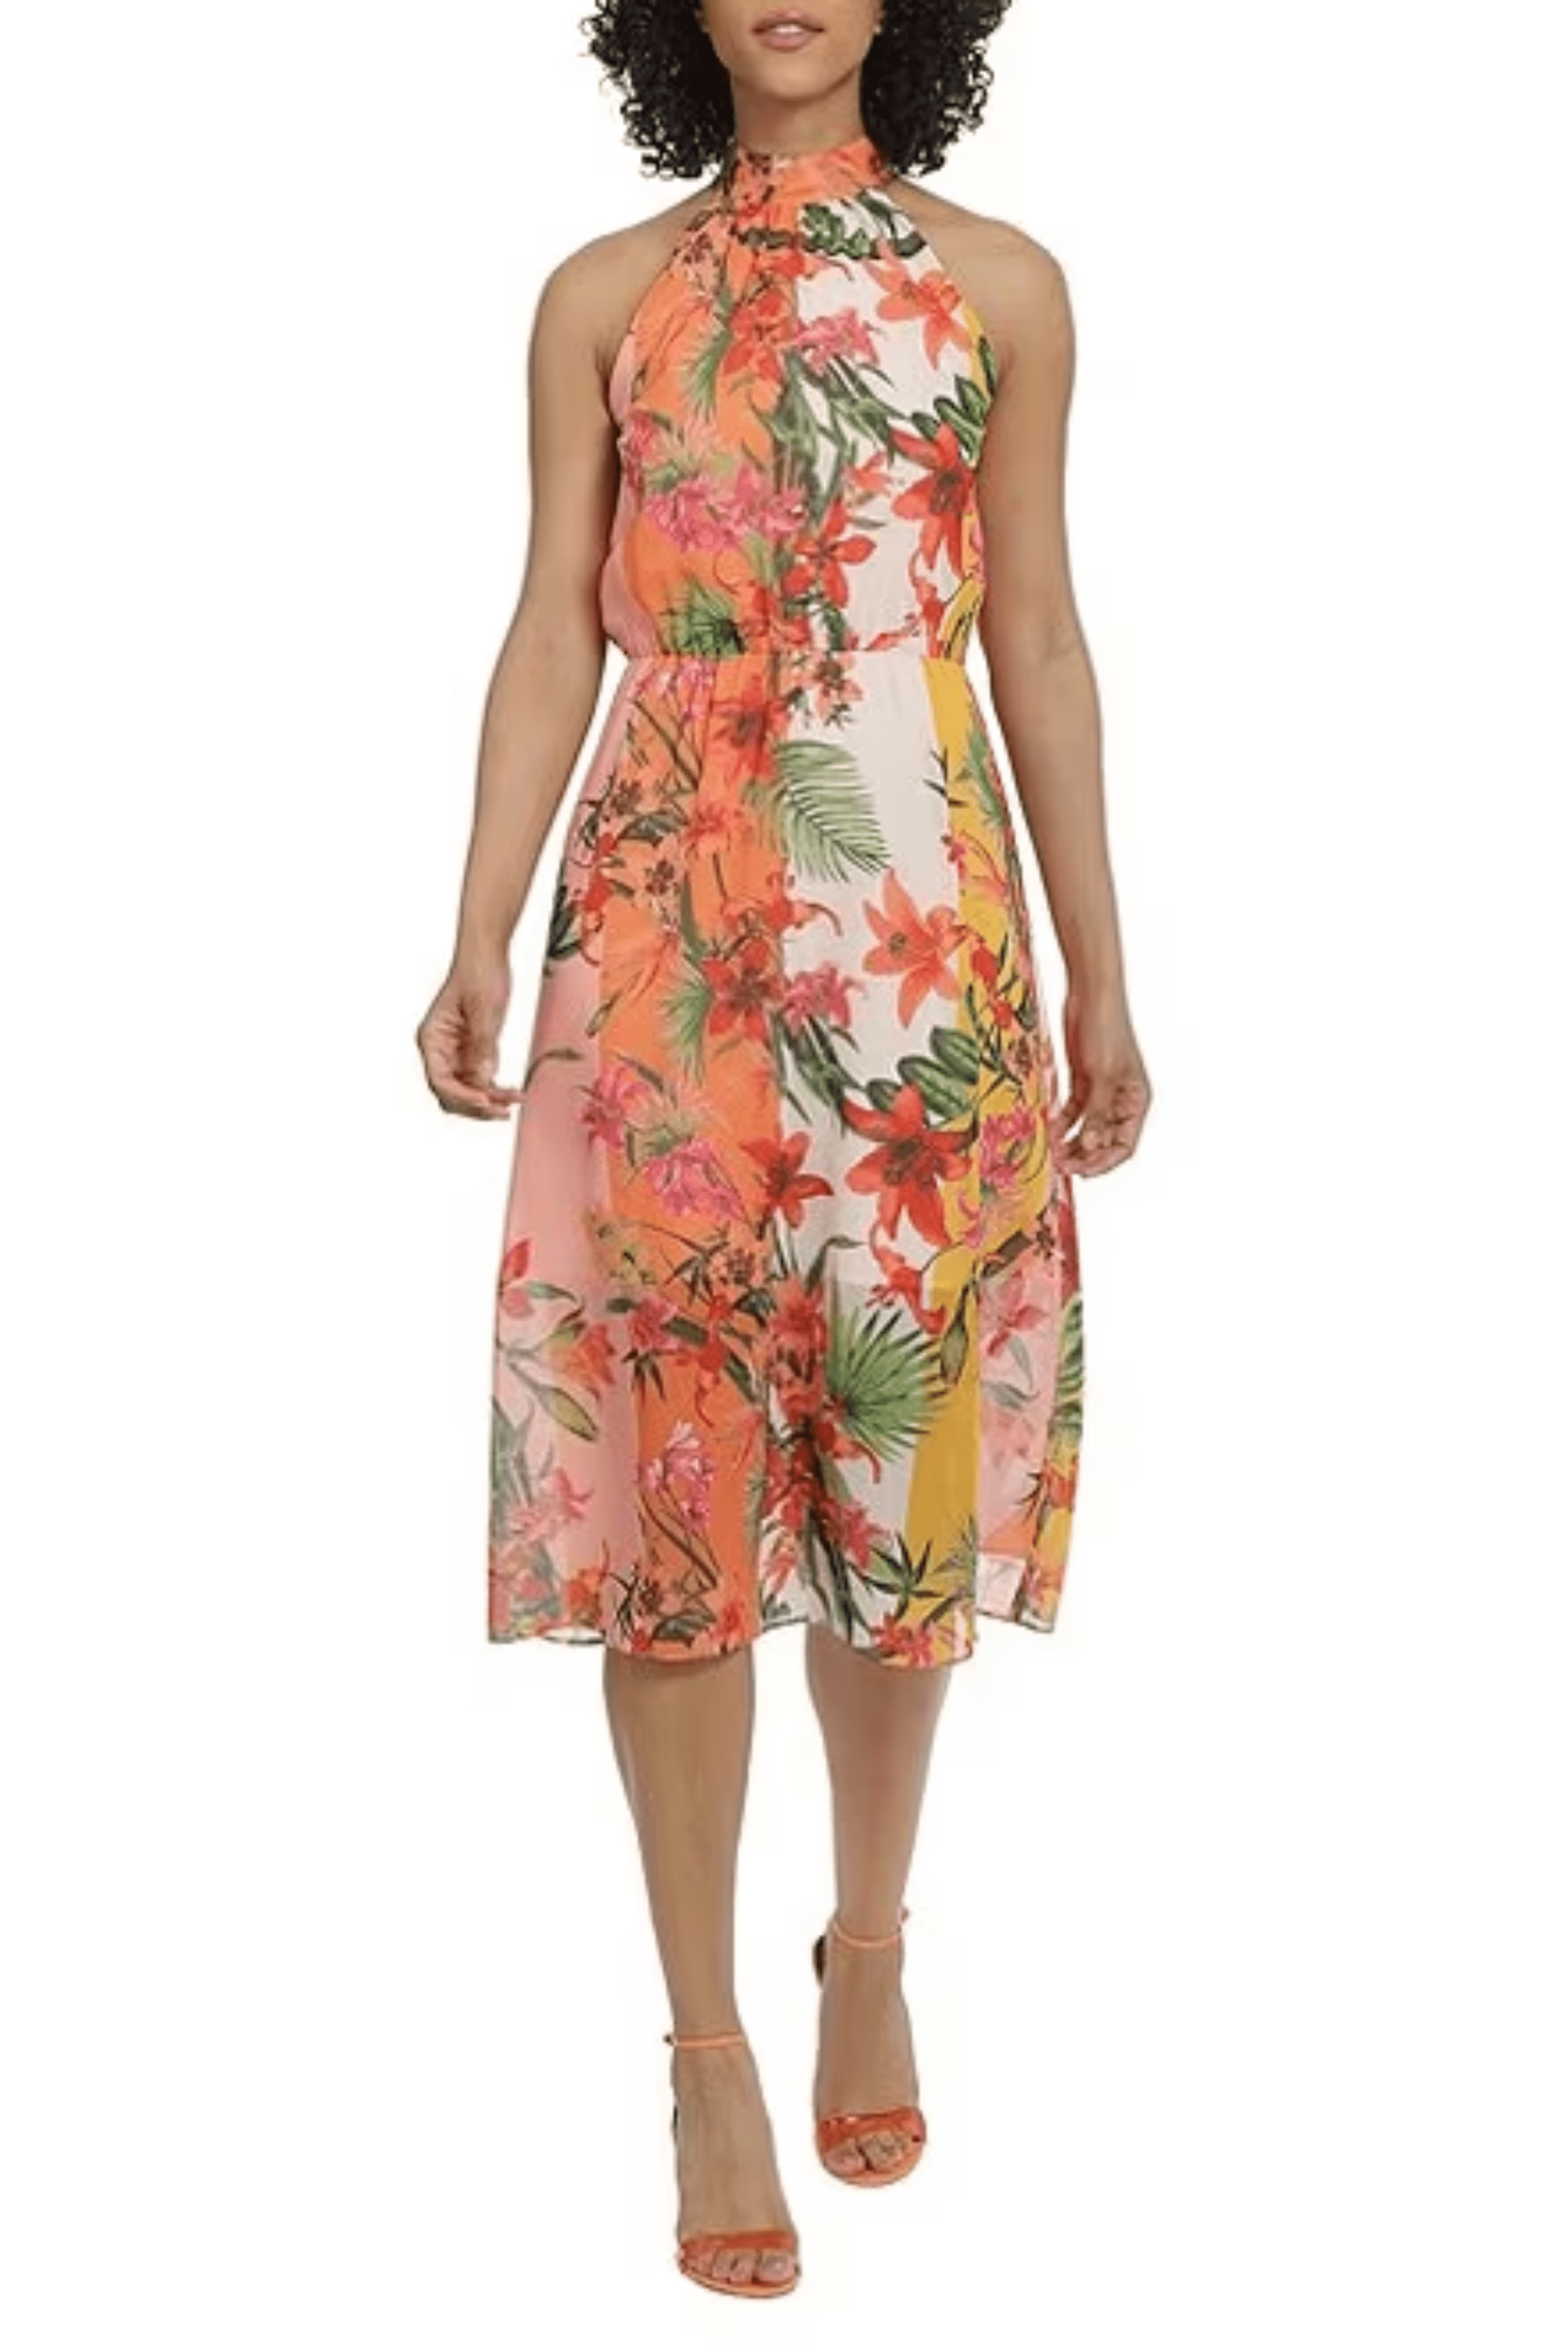 Maggy London, Maggy London G5640M - Halter Floral Printed Formal Dress